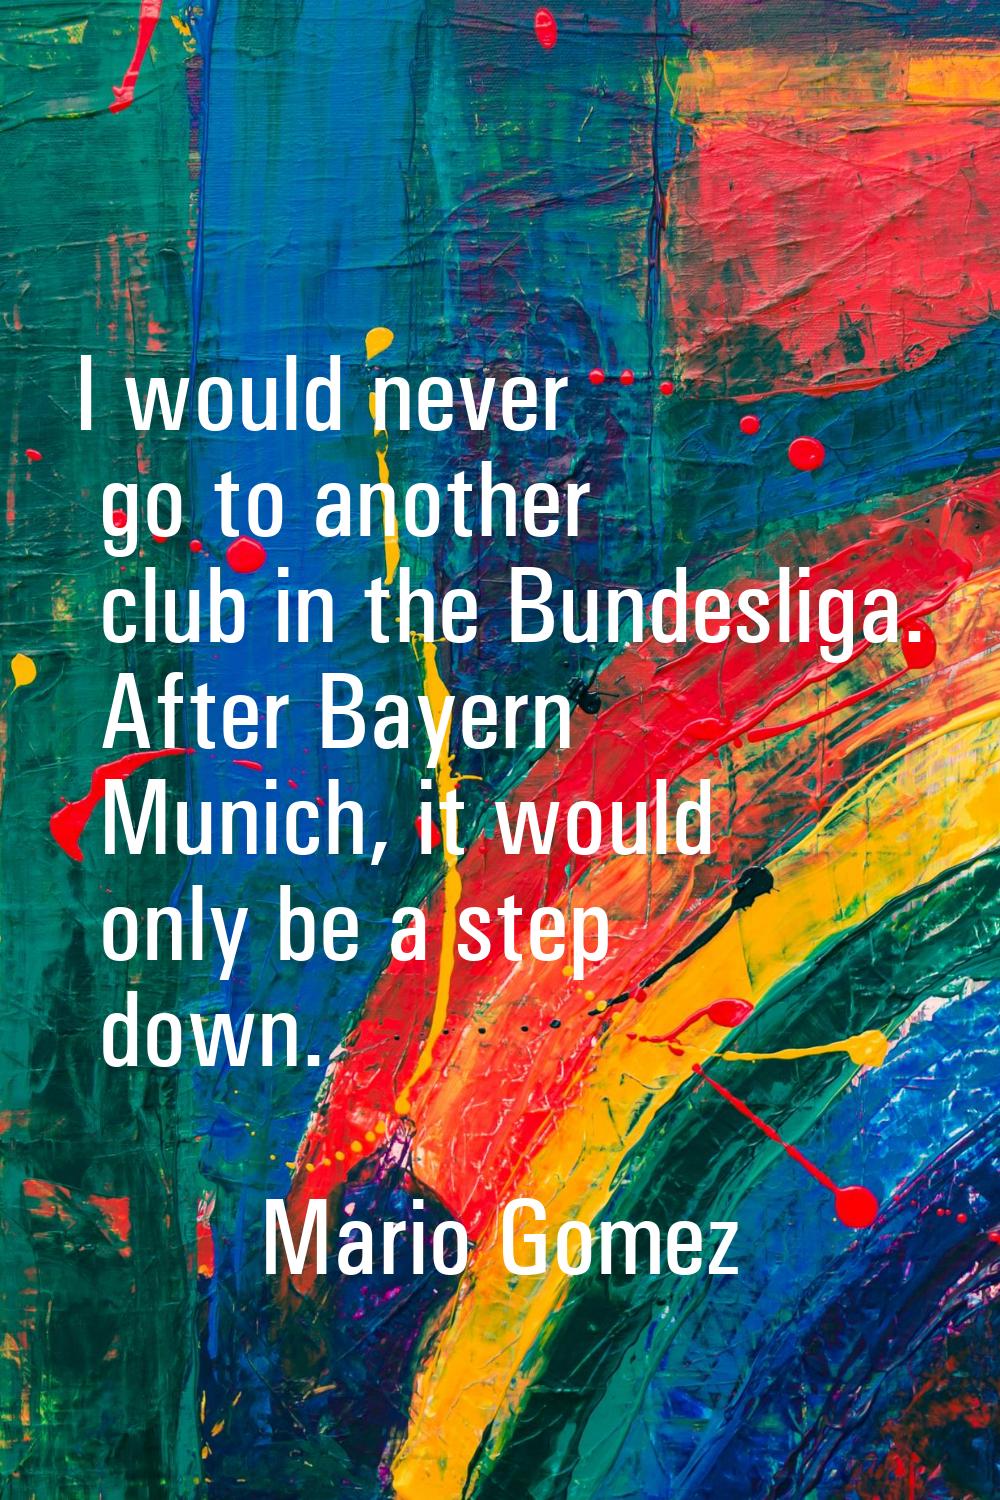 I would never go to another club in the Bundesliga. After Bayern Munich, it would only be a step do